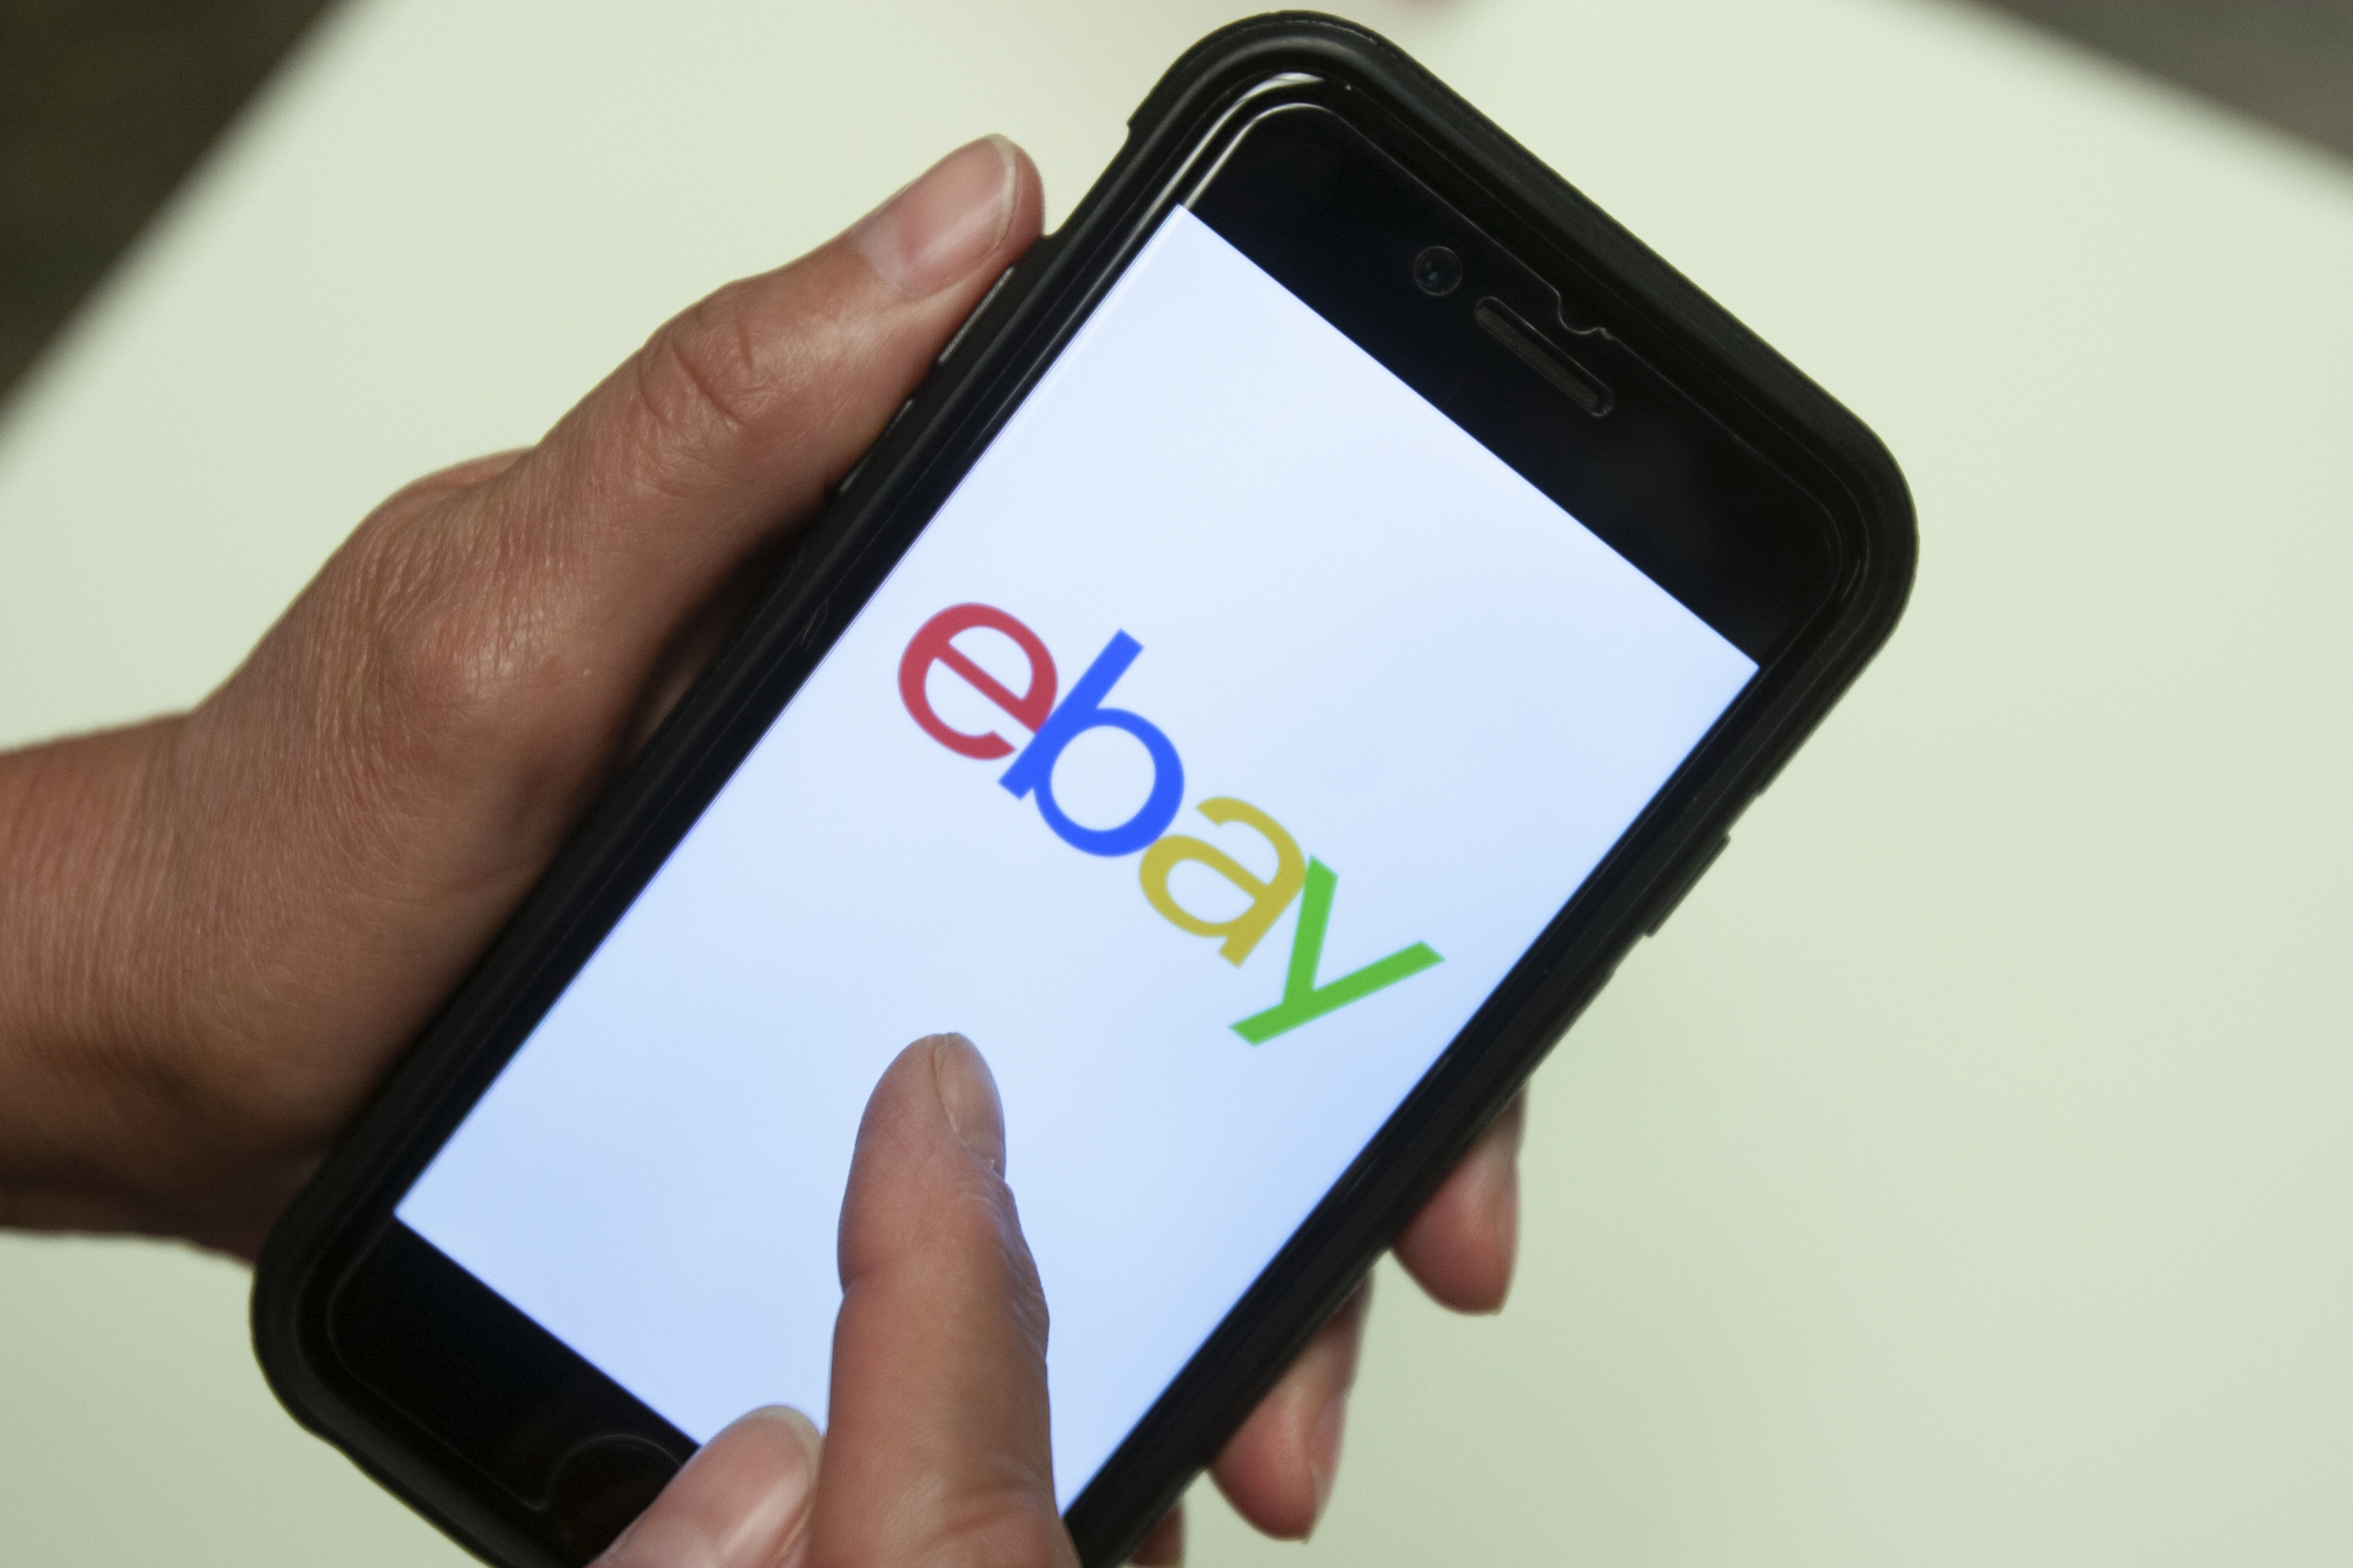 13 items that sell on eBay, Craigslist and Facebook Marketplace - WTOP